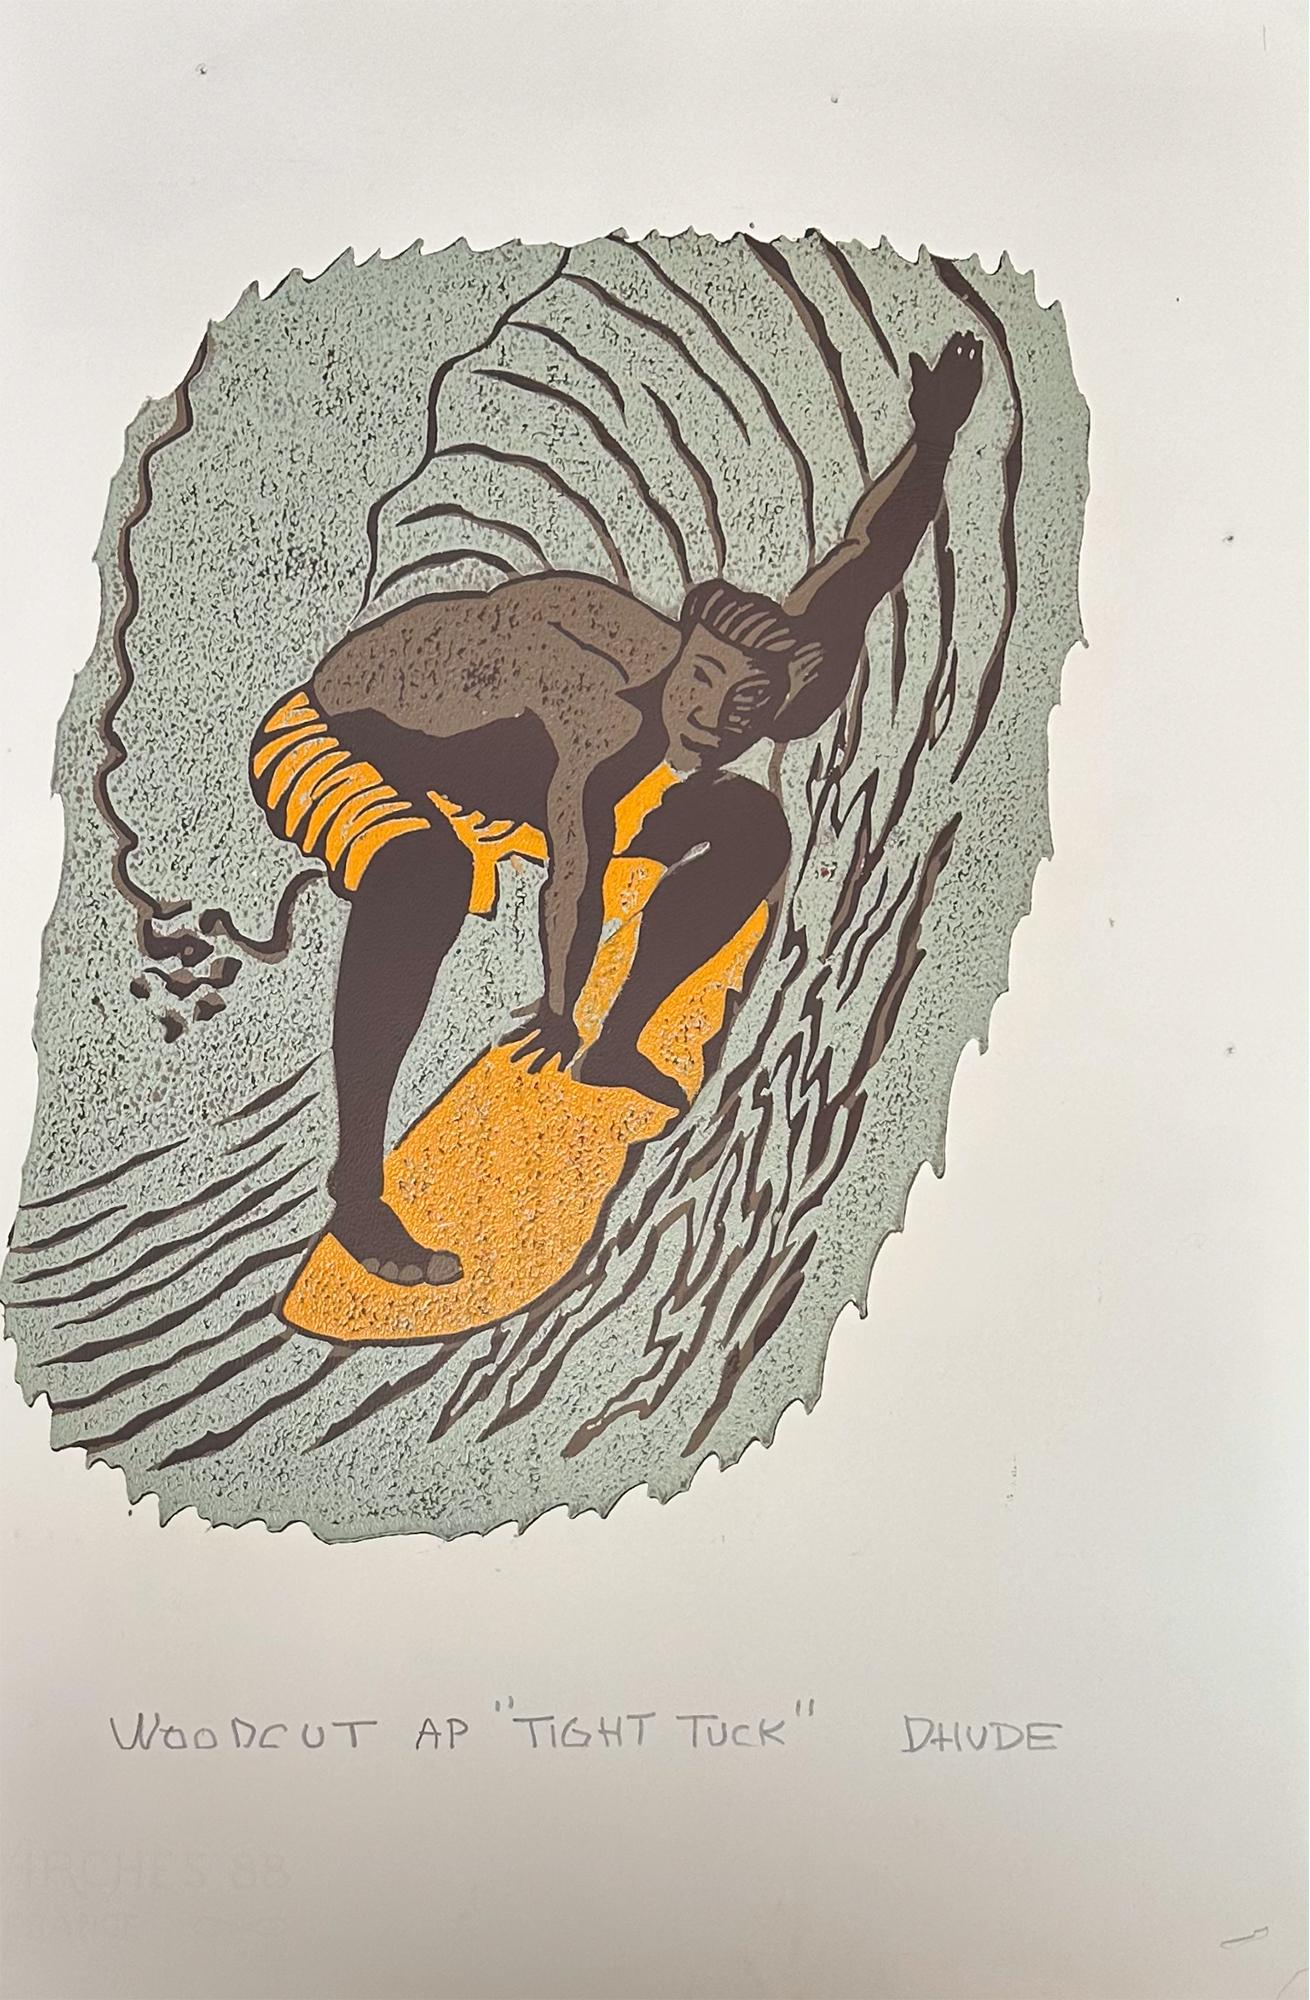 Tight Tuck - Surfing Art - Figurative - Woodcut Print By Marc Zimmerman

Limited Edition 01/04

This masterwork is exhibited in the Zimmerman Gallery, Carmel CA.

Immerse yourself in the captivating world of surfing and ocean vibes with Marc